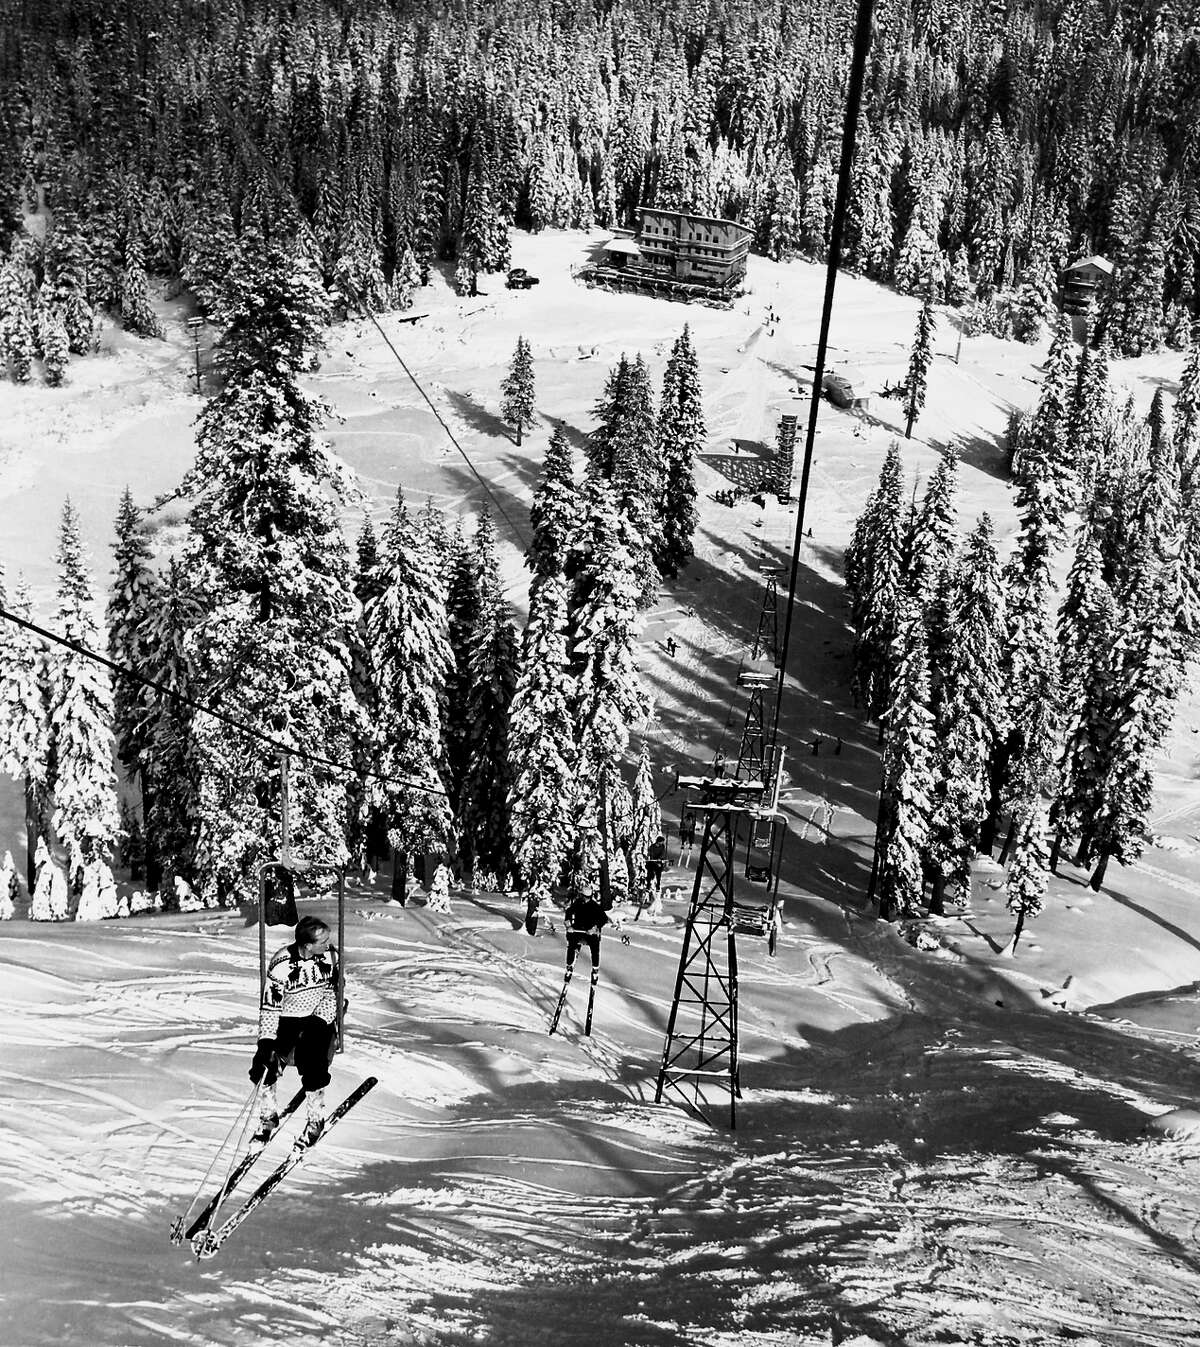 Sugar Bowl, shown in these historic photos, celebrated its 75th anniversary over the winter but is closing for the season relatively early in the wake of poor snowfall.